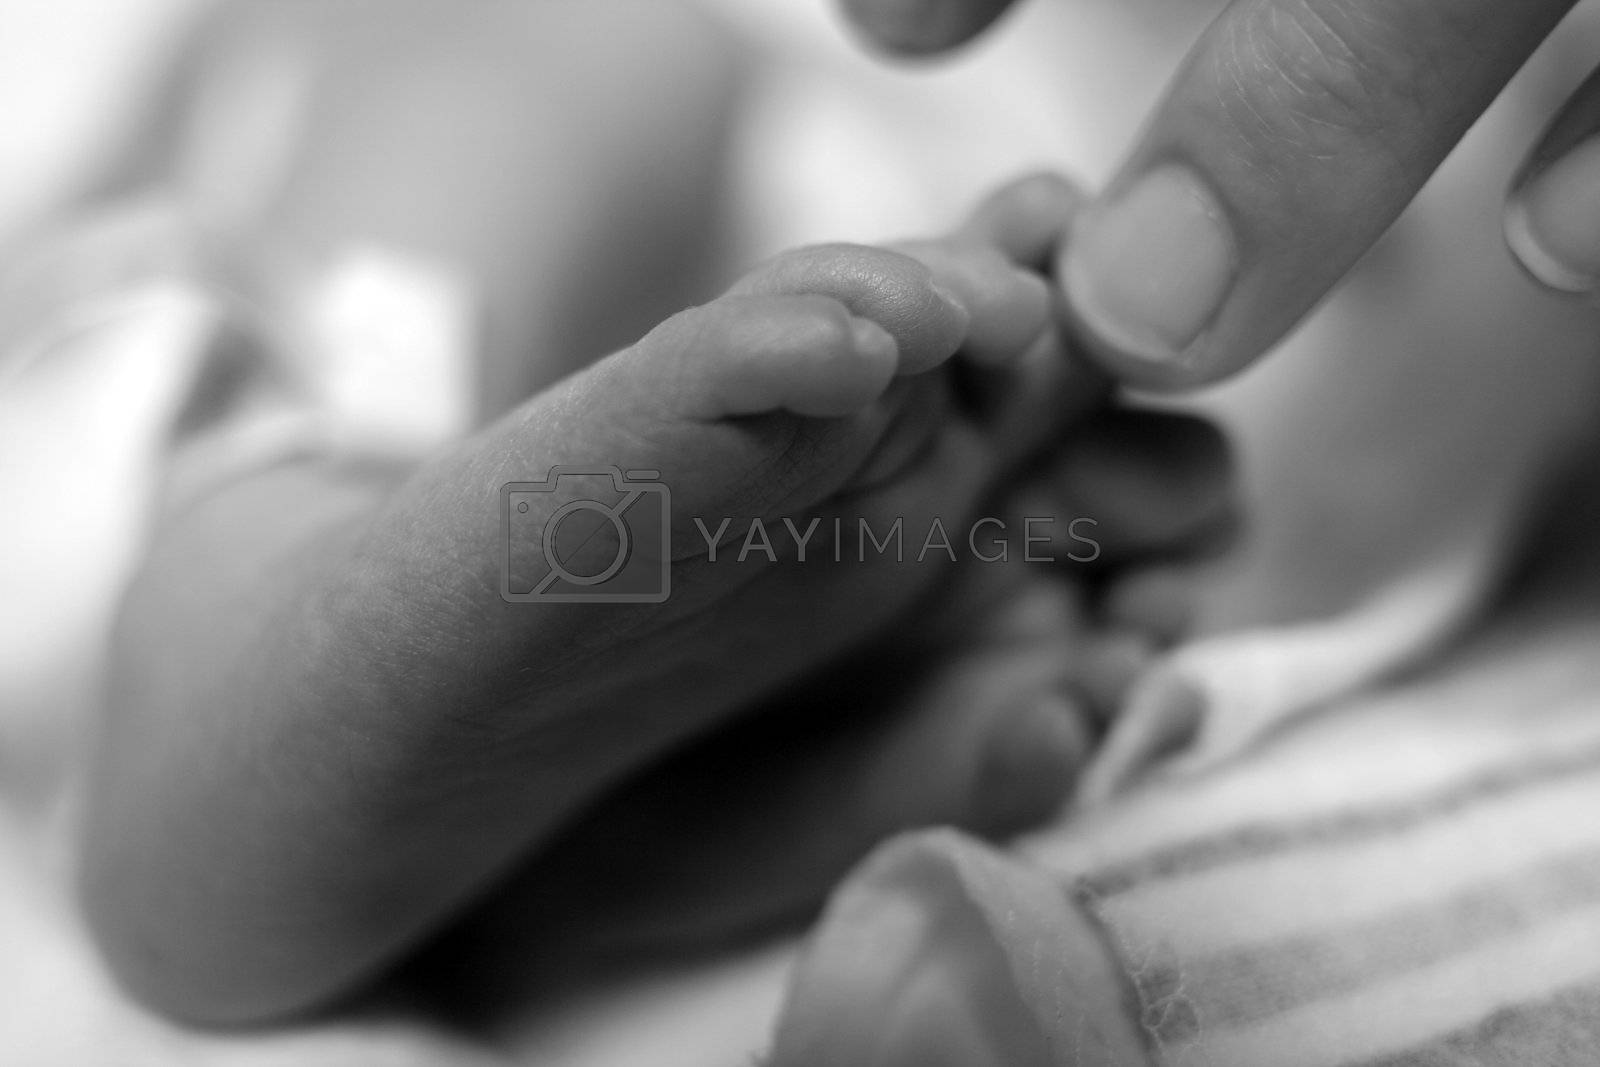 Royalty free image of Newborn baby toes by mahnken